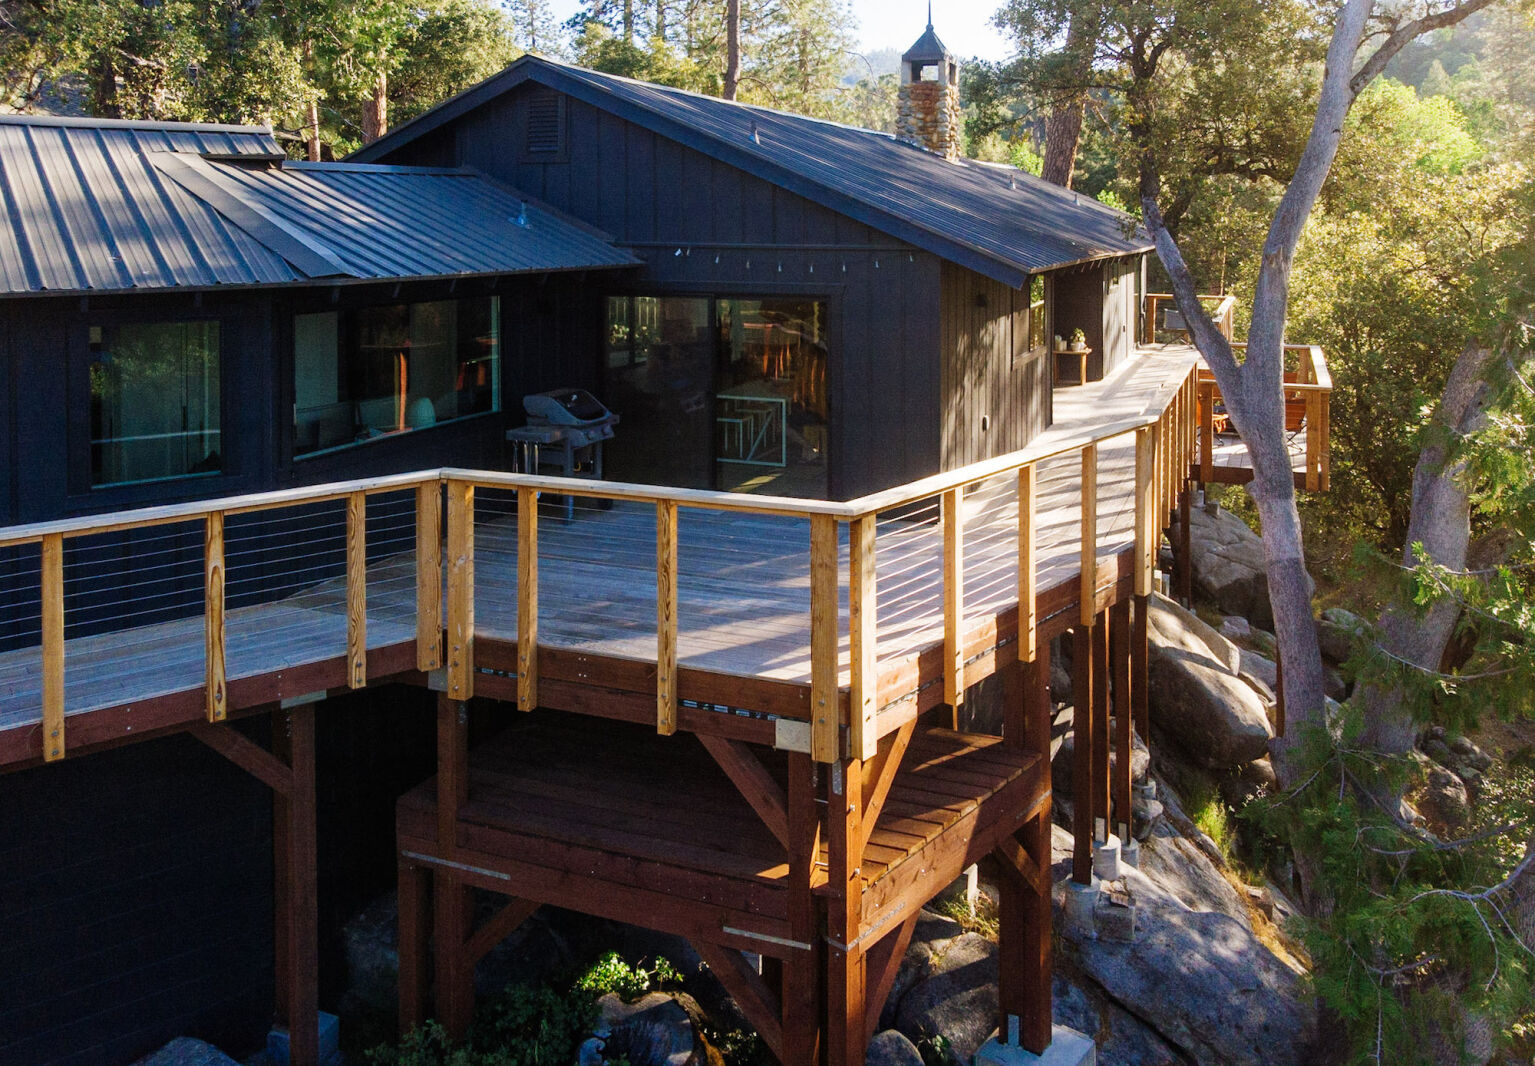 Yosemite Waterfall House A Vacation Home Becomes a FullTime Residence for a NatureLoving Couple portrait 3